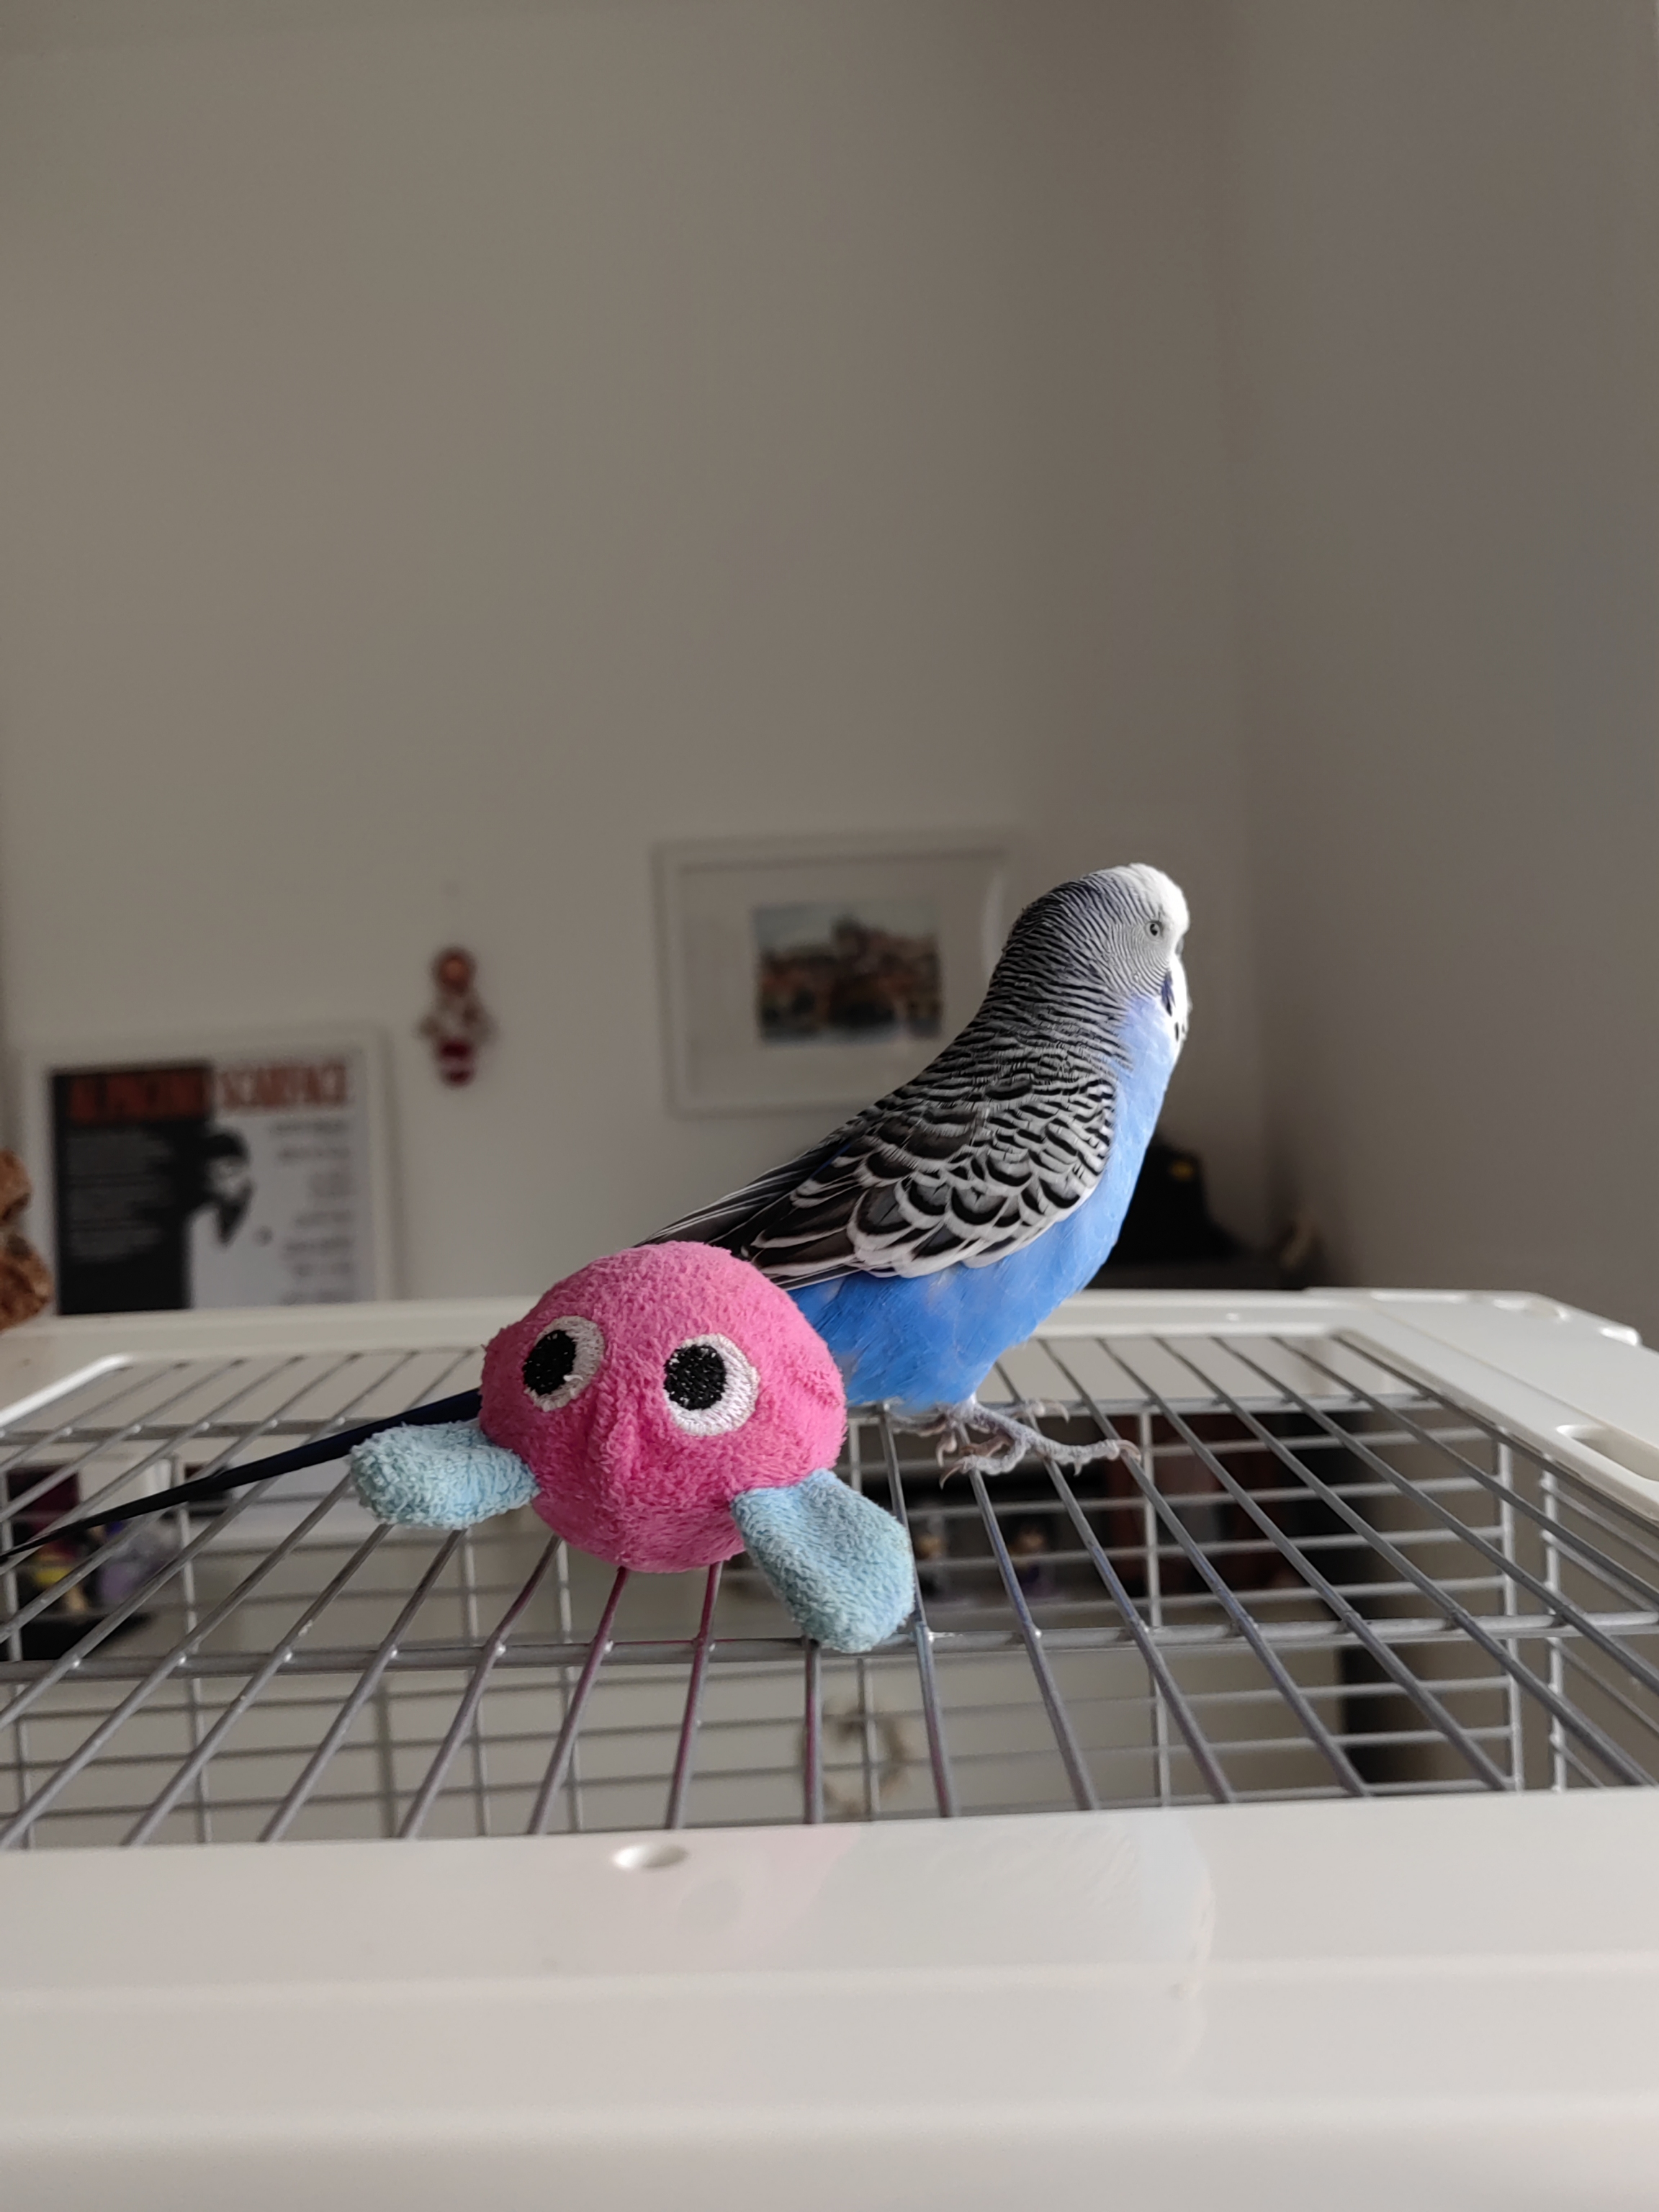 Everything You Need to Know About Buying and Caring for Budgies at PetSmart - The Ultimate Guide for Bird Owners